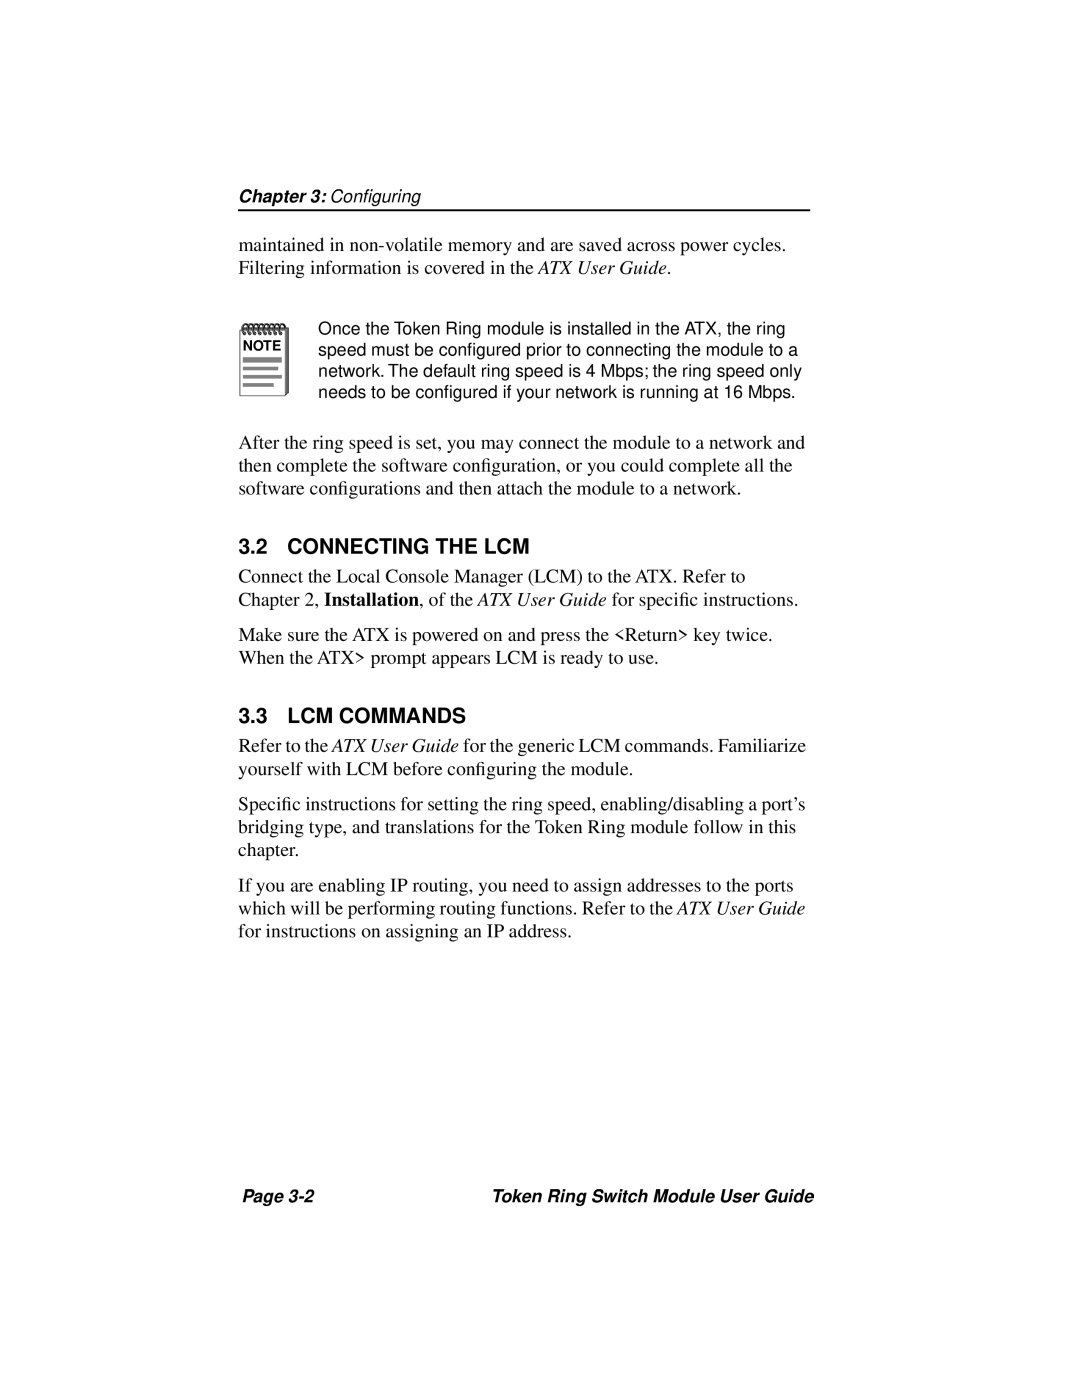 Cabletron Systems 3T02-04 manual Connecting The Lcm, Lcm Commands 